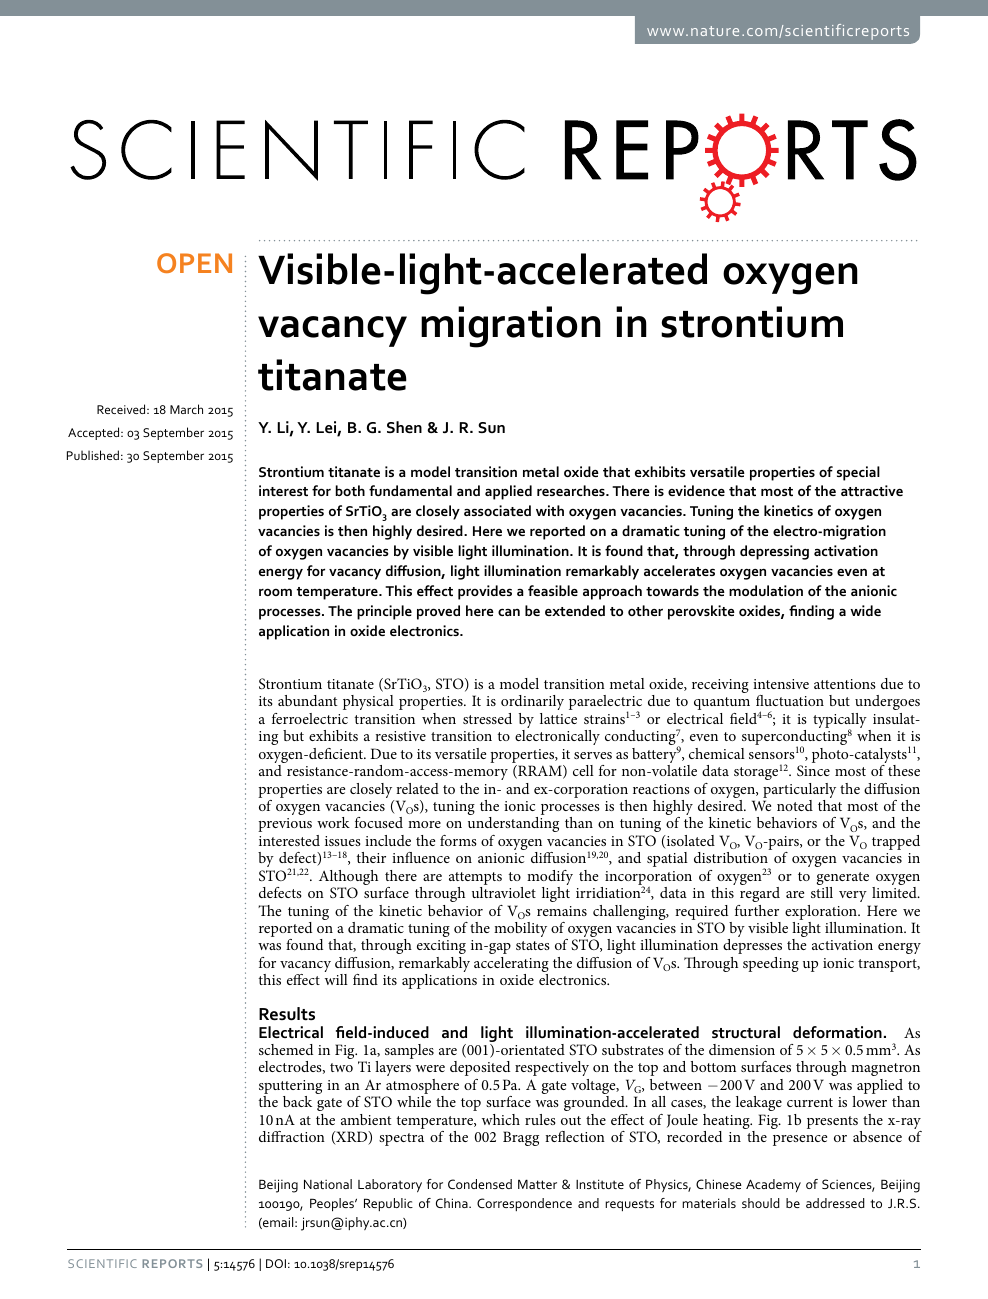 Visible Light Accelerated Oxygen Vacancy Migration In Strontium Titanate Topic Of Research Paper In Nano Technology Download Scholarly Article Pdf And Read For Free On Cyberleninka Open Science Hub